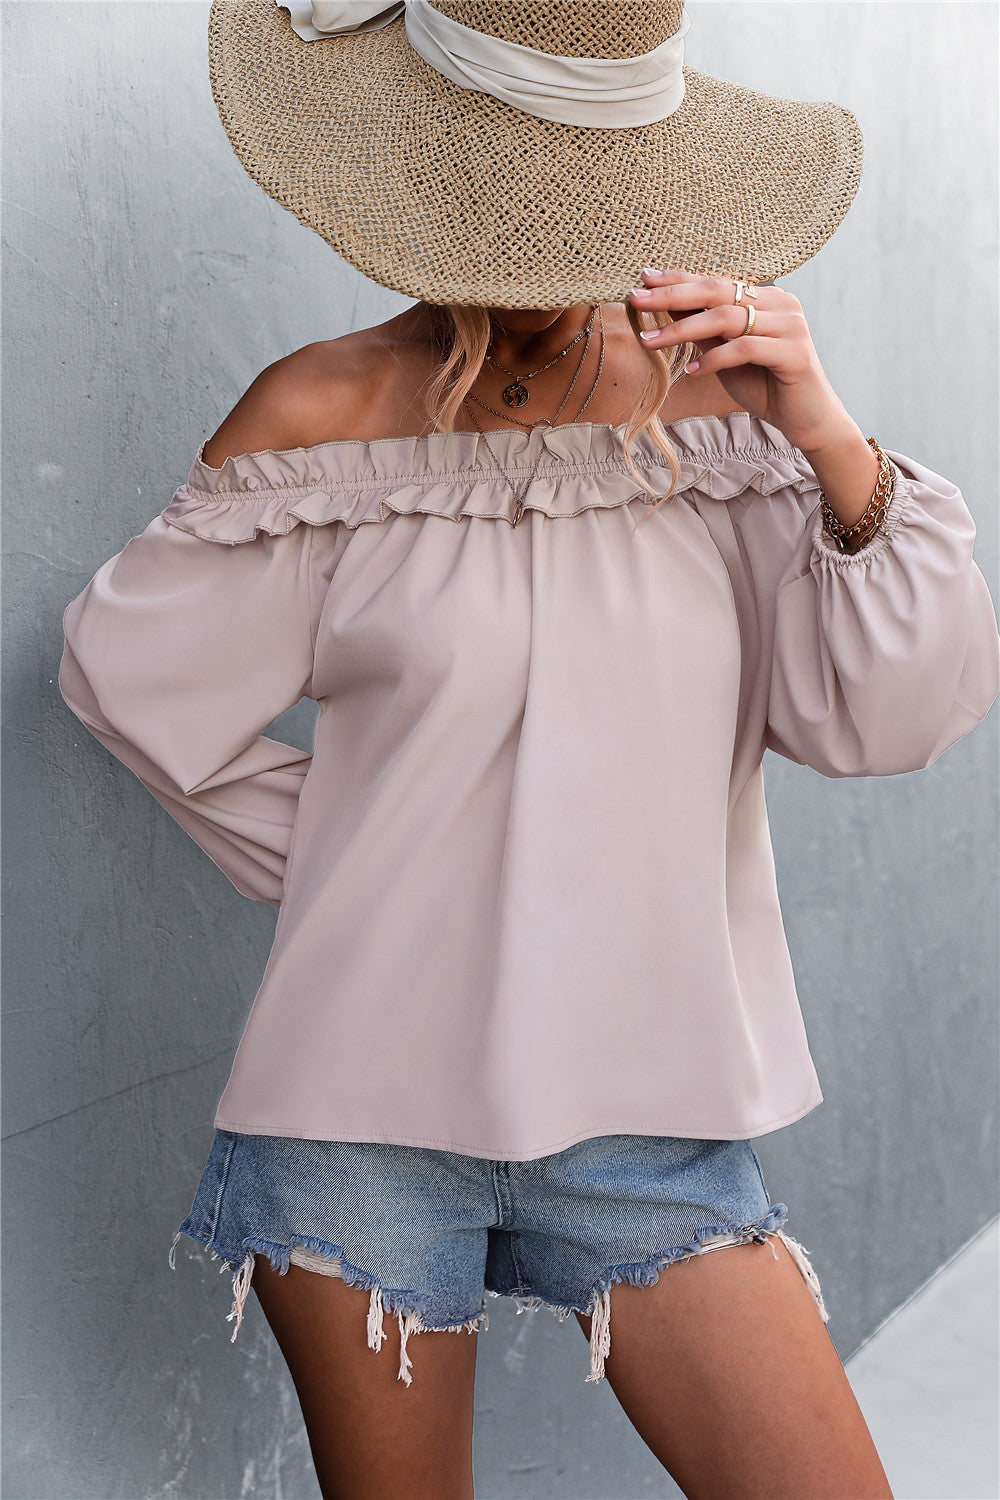 Solid Color Sexy Off-the-shoulder Lantern Sleeve T-shirt Top For Women